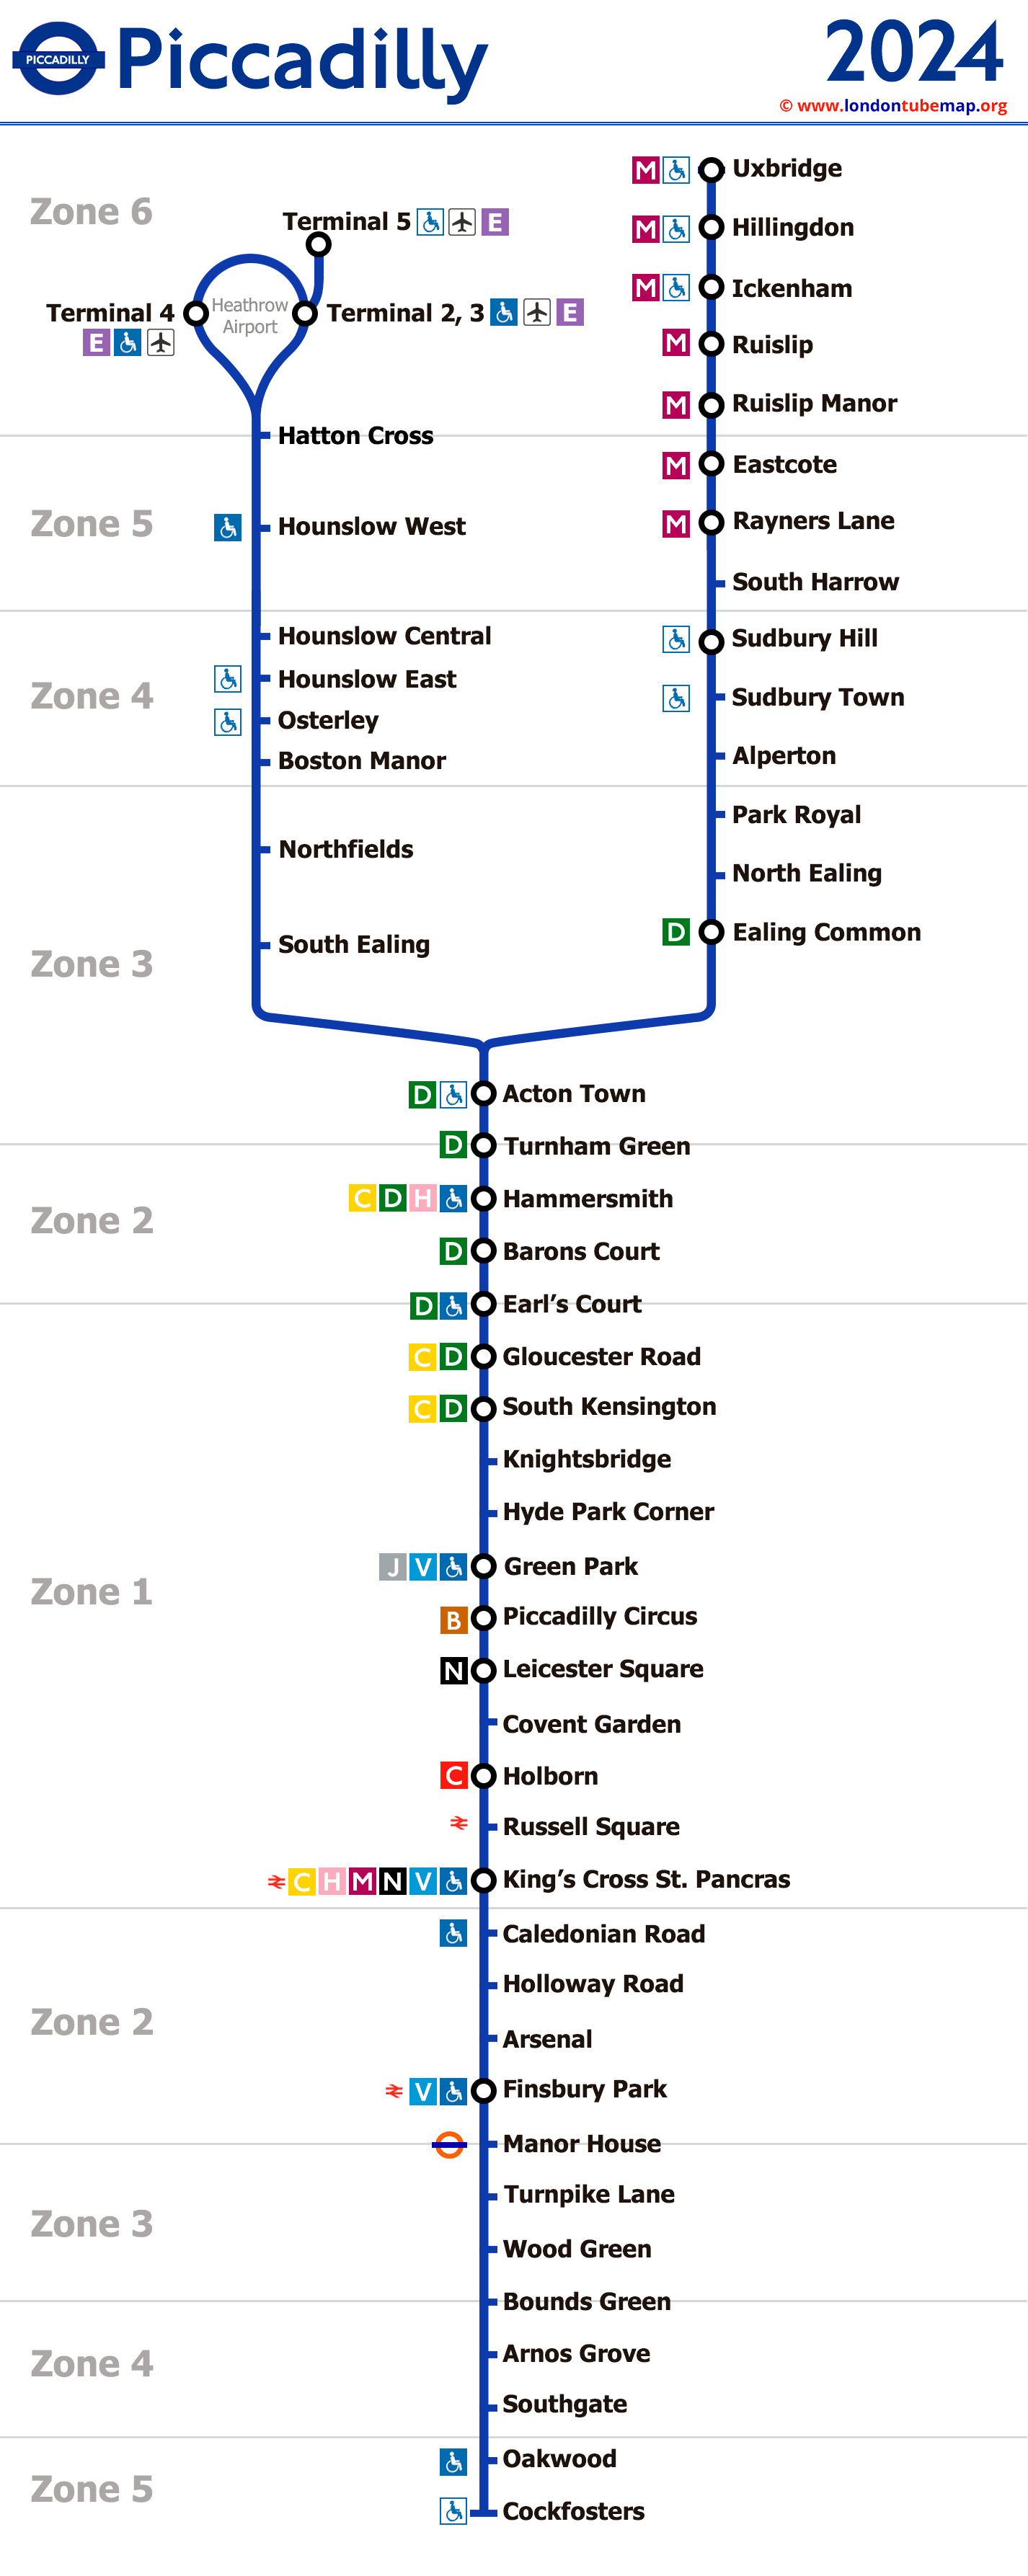 Piccadilly tube line map 2024